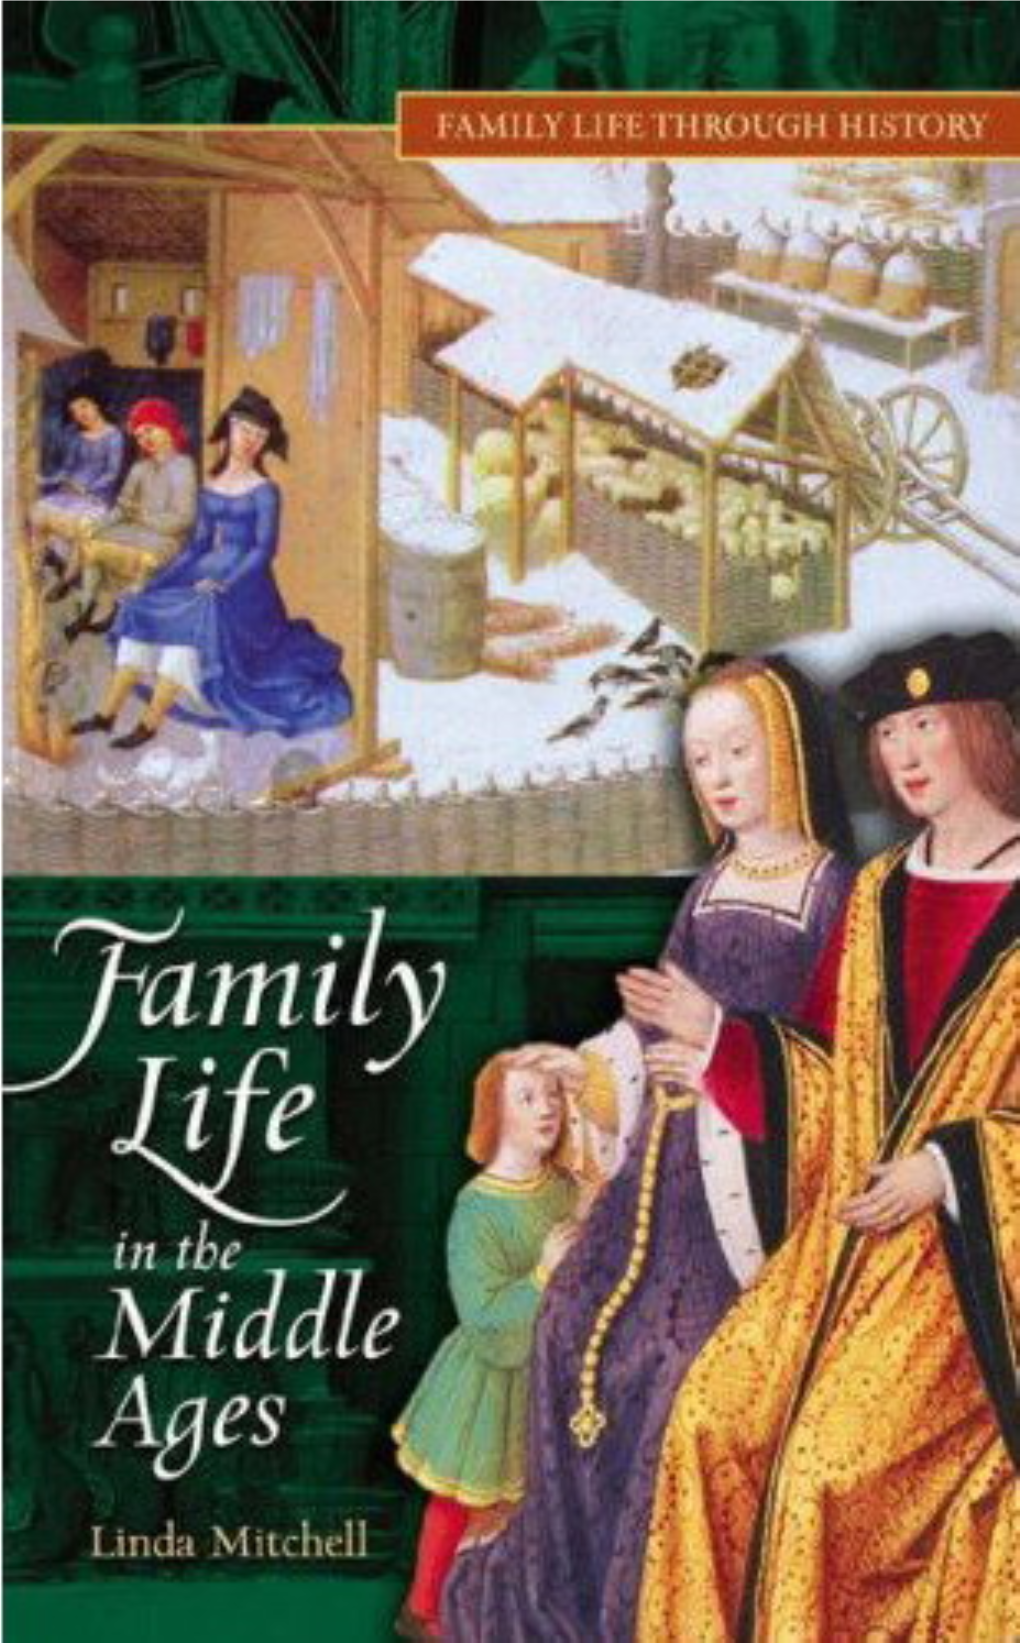 1 the Late Roman Family and Transition to the Middle Ages